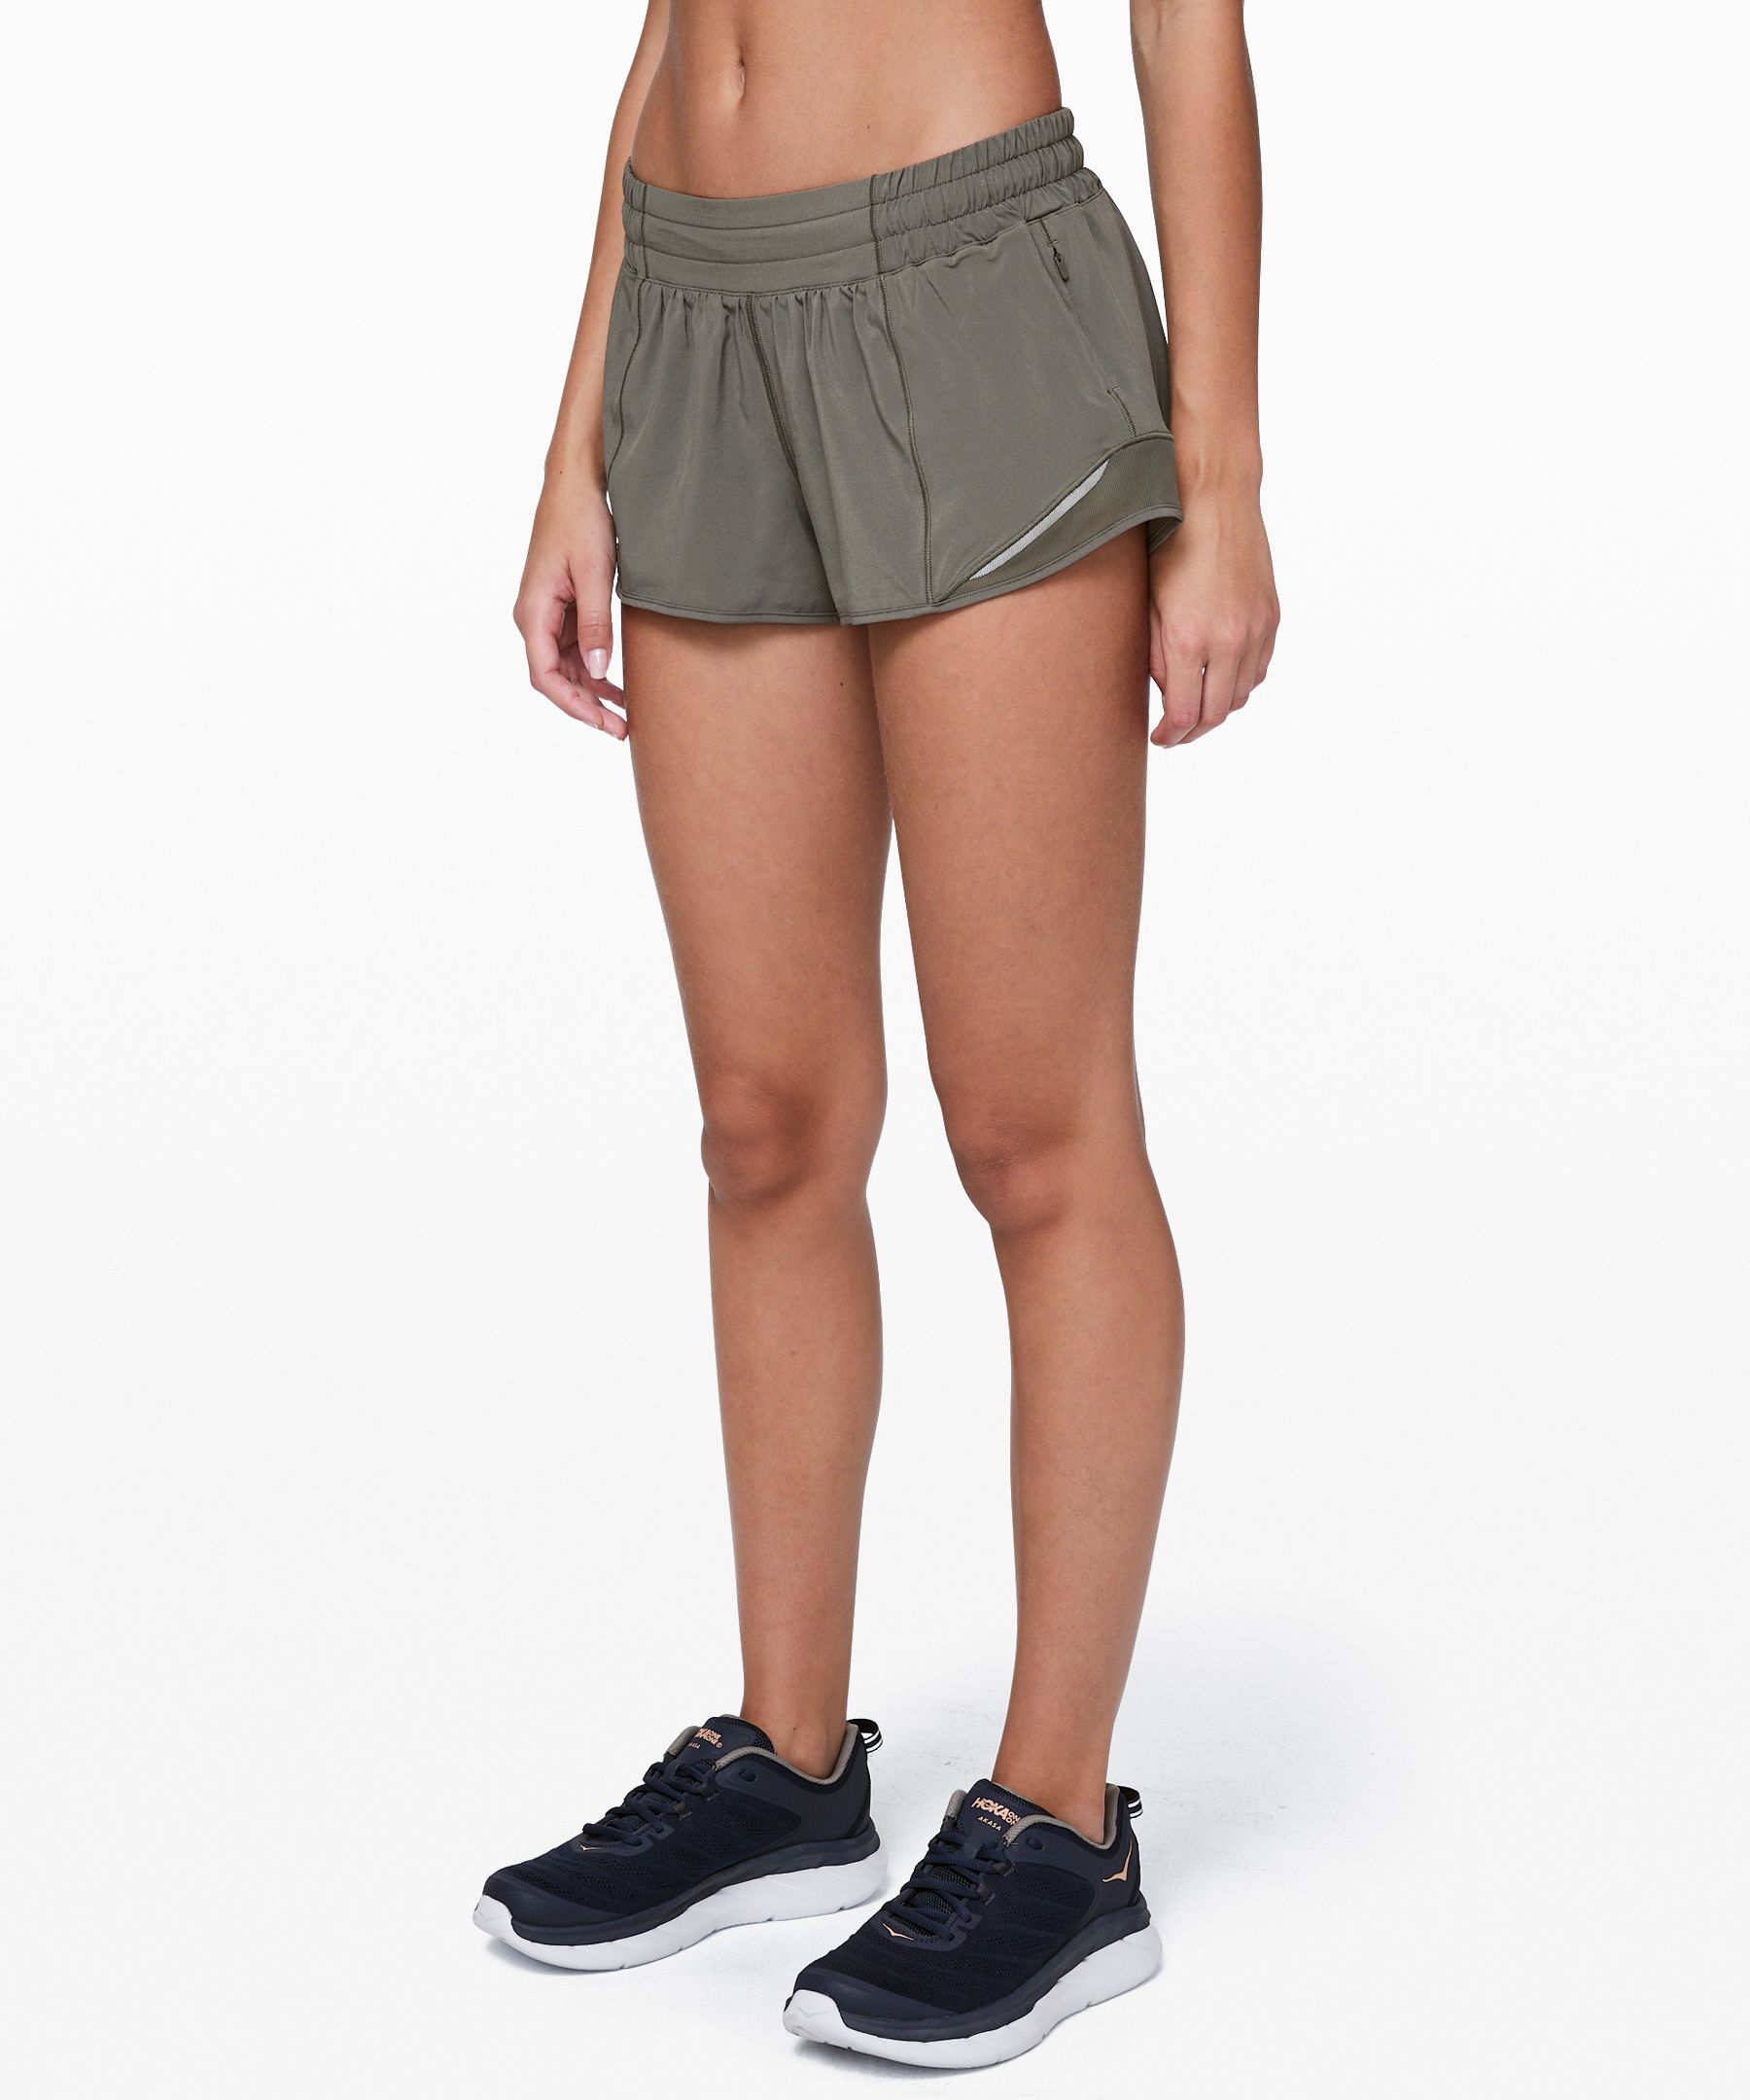 Lululemon Hotty Hot Shorts (Size 2) for Sale in Sunnyvale, CA - OfferUp